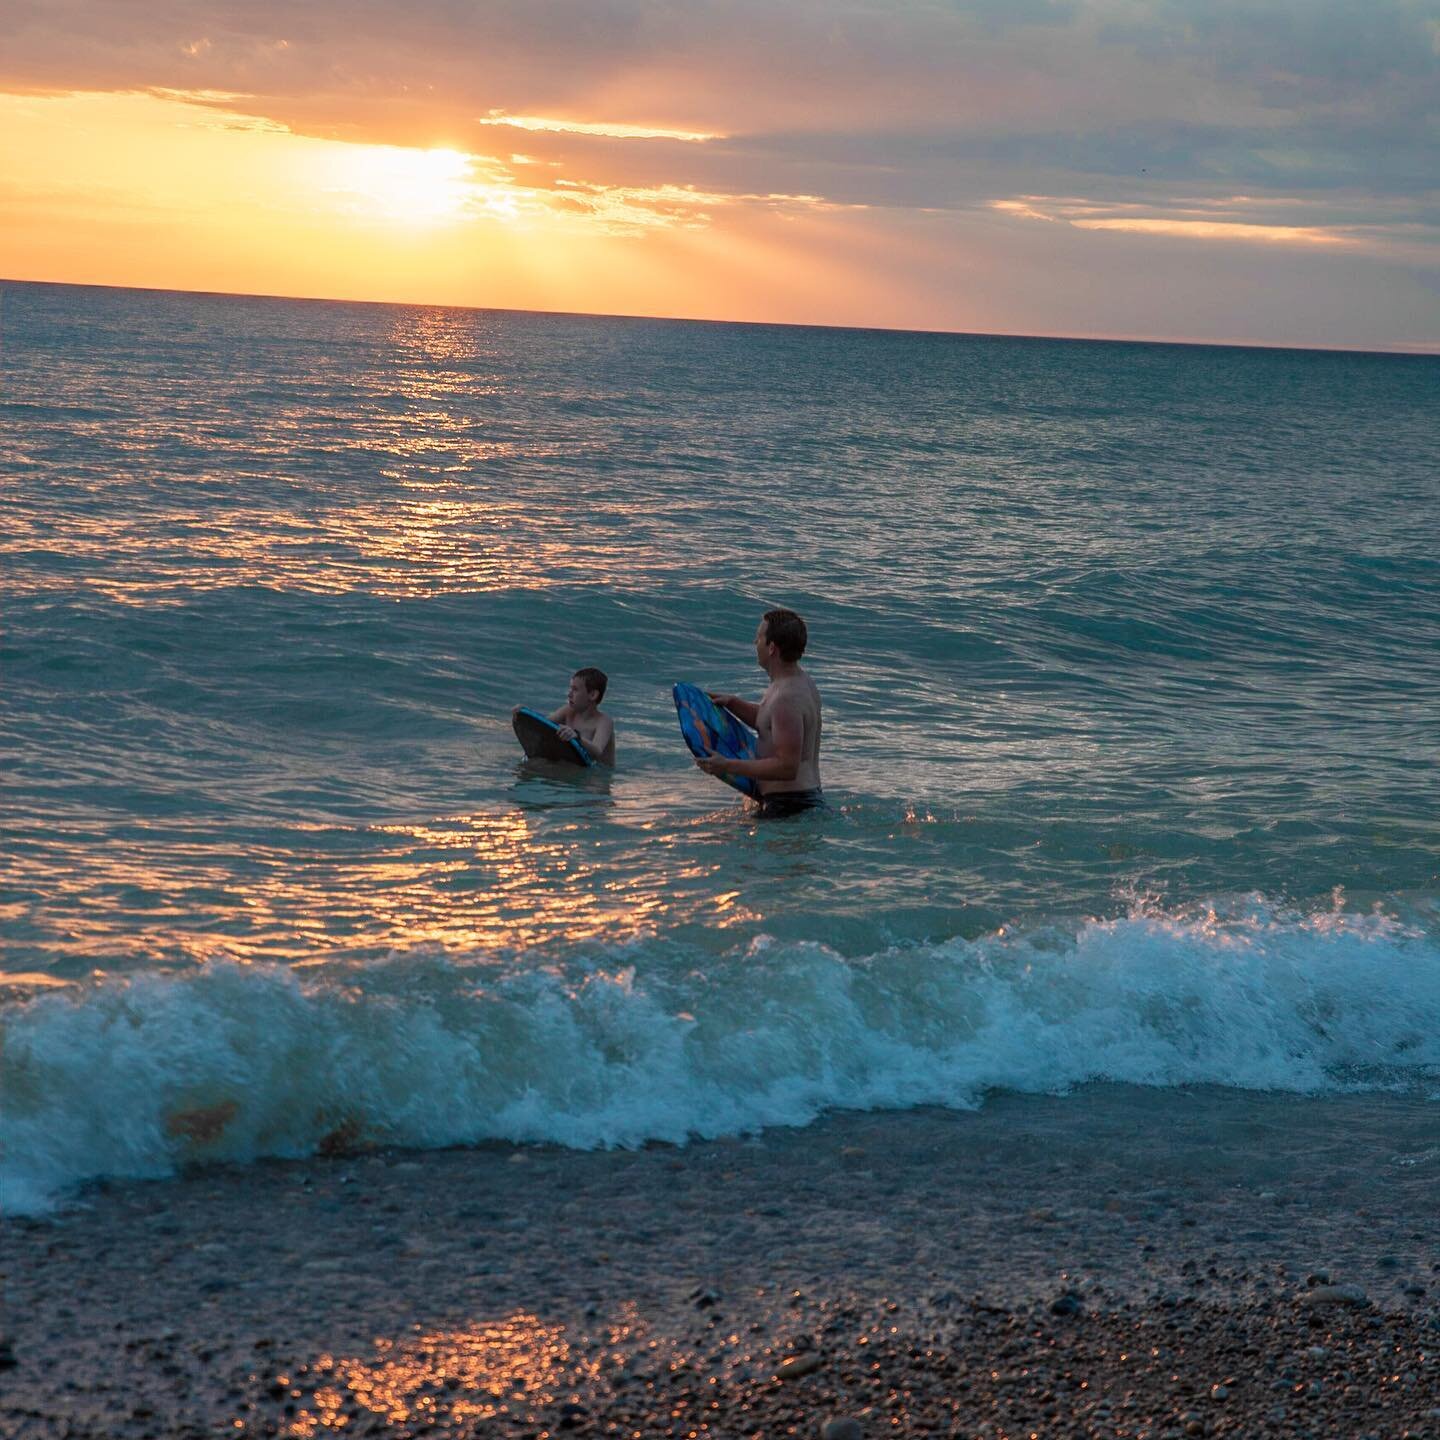 It&rsquo;s always worth it to take time off to spend with the people you love! Lake Michigan was always a place our family would go to relax when I was young, and I&rsquo;m so glad to share this beach fun with the next generation. What are you favori